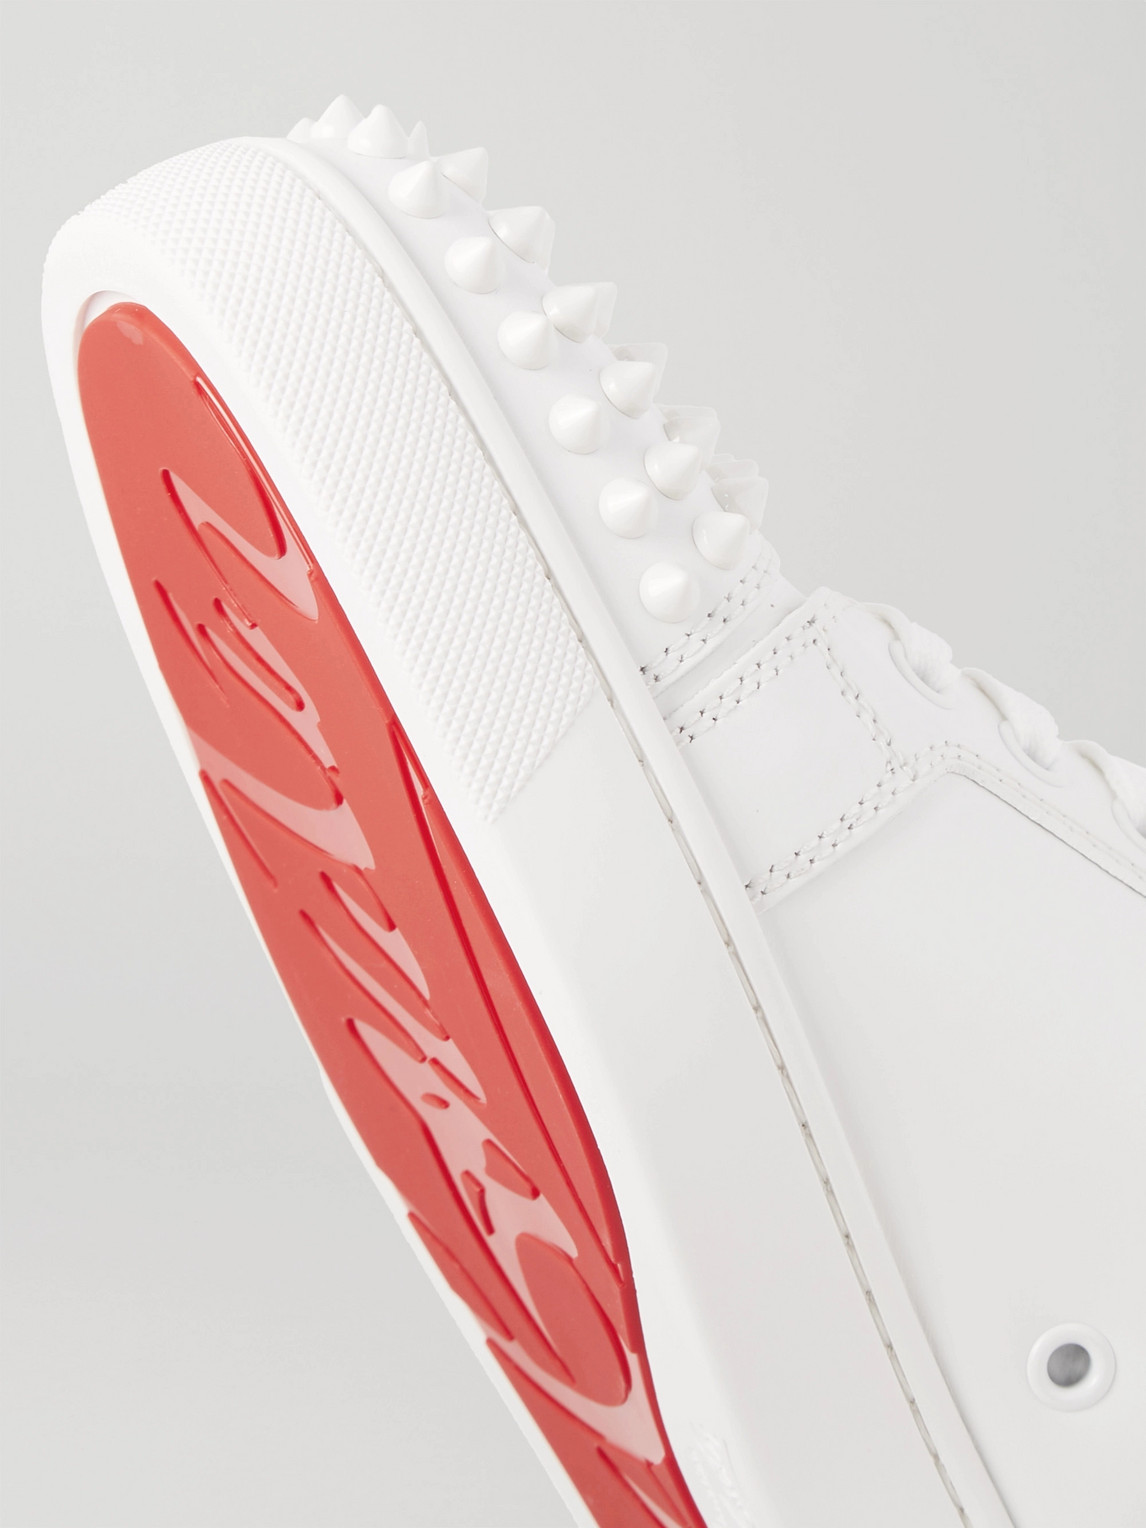 Shop Christian Louboutin Louis Junior Spikes Cap-toe Leather Sneakers In White